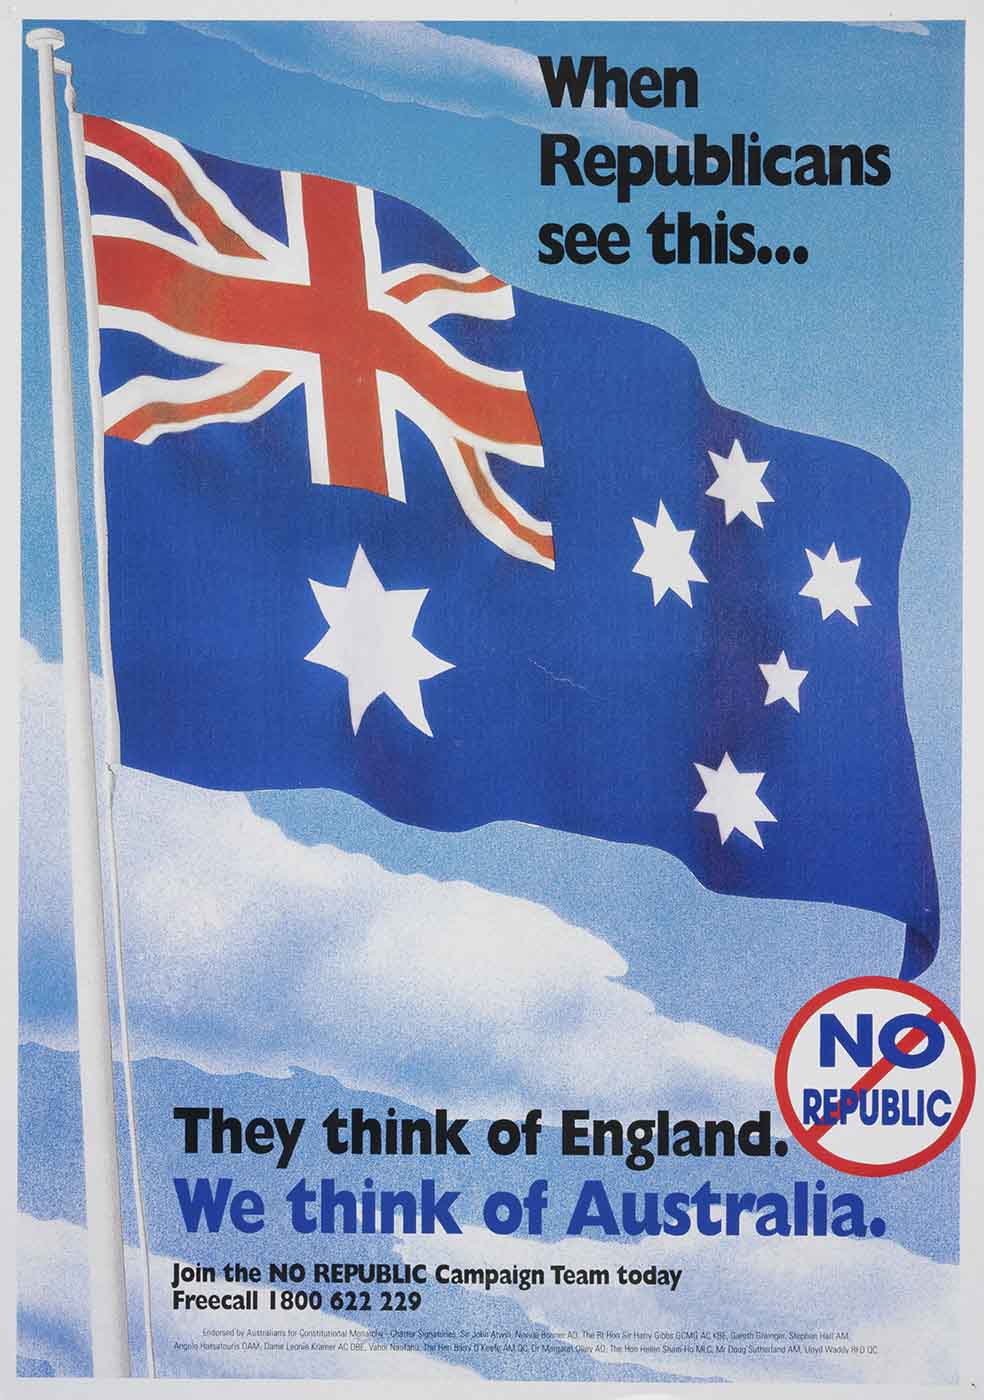 Poster with an image of the Australian flag against a blue cloudy sky background. The text reads: 'When Republicans see this ... They think of England. We think of Australia. Join the NO REPUBLIC Campaign Team today. Freecall 1800 622 229. NO REPUBLIC'. - click to view larger image